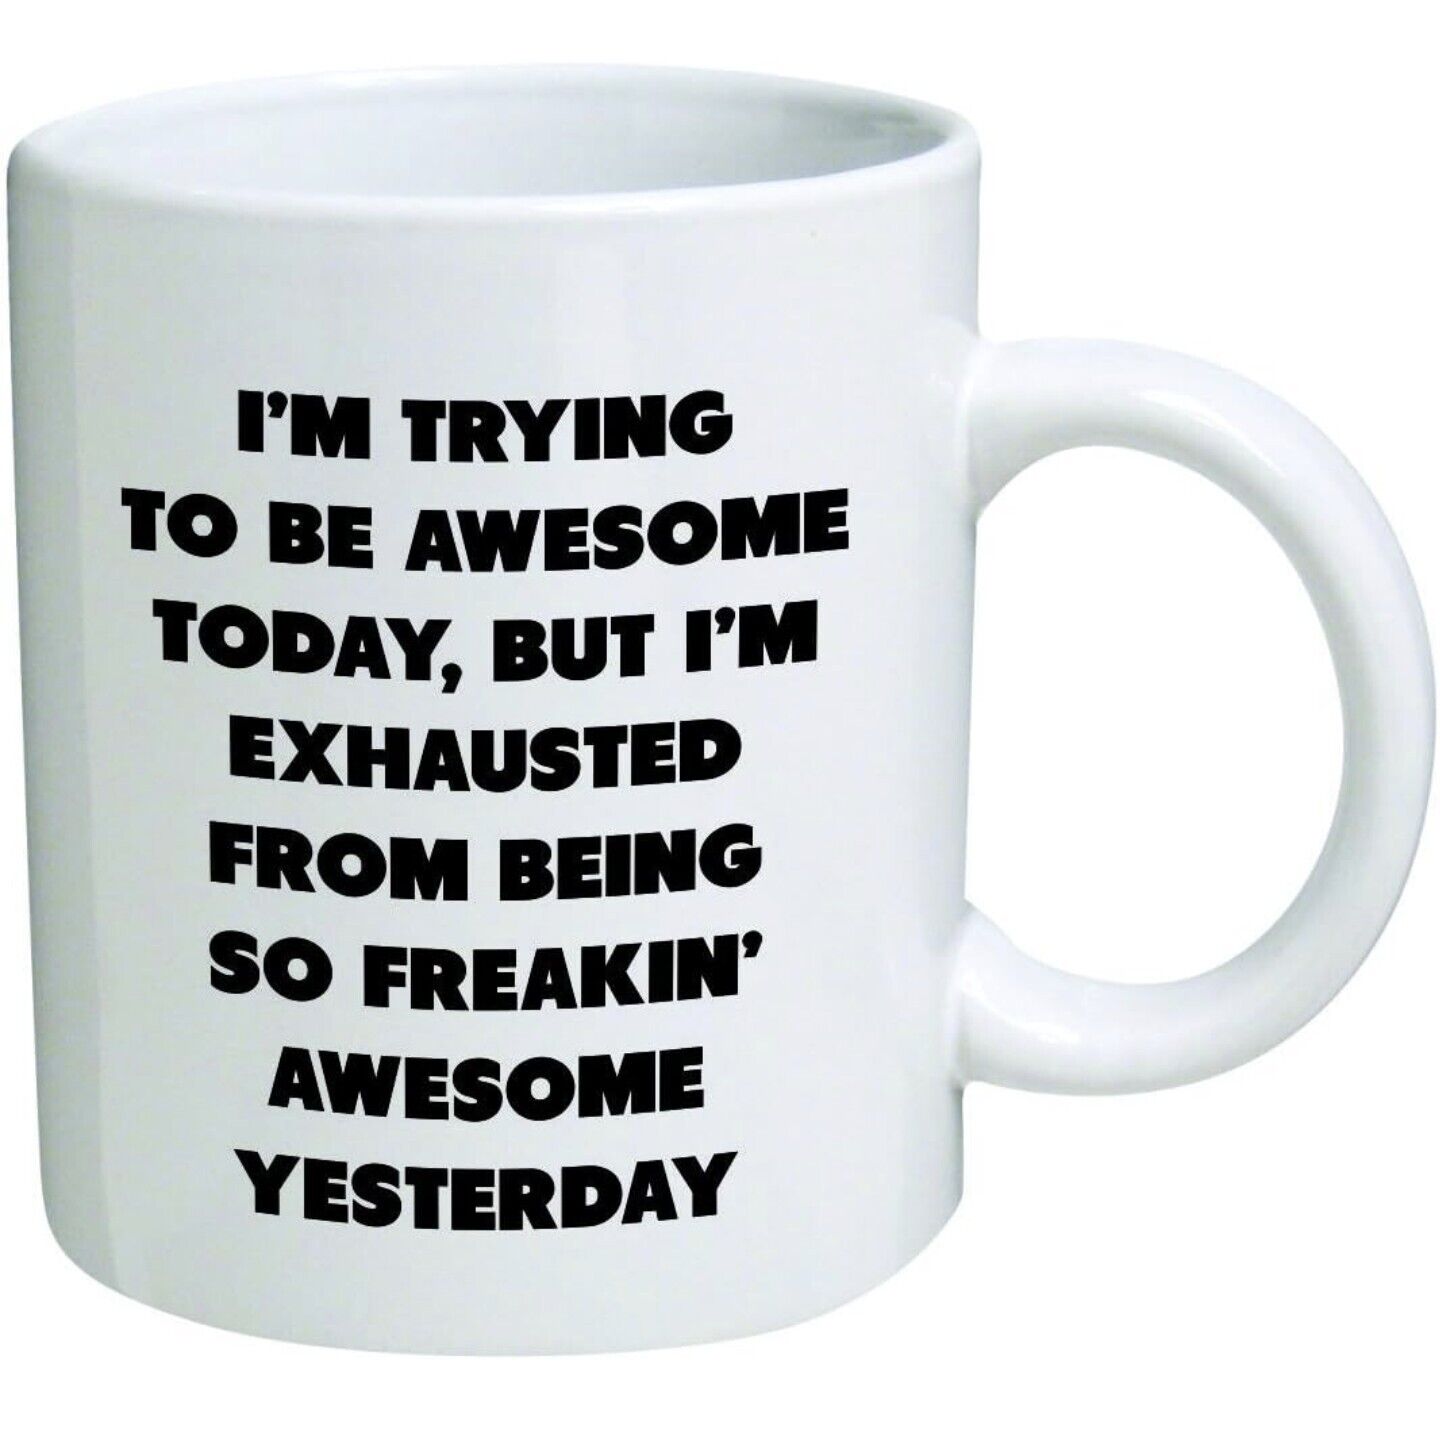 I'm Trying To Be Awesome Today - Funny Coffee Cup - 11oz or 15oz Mug